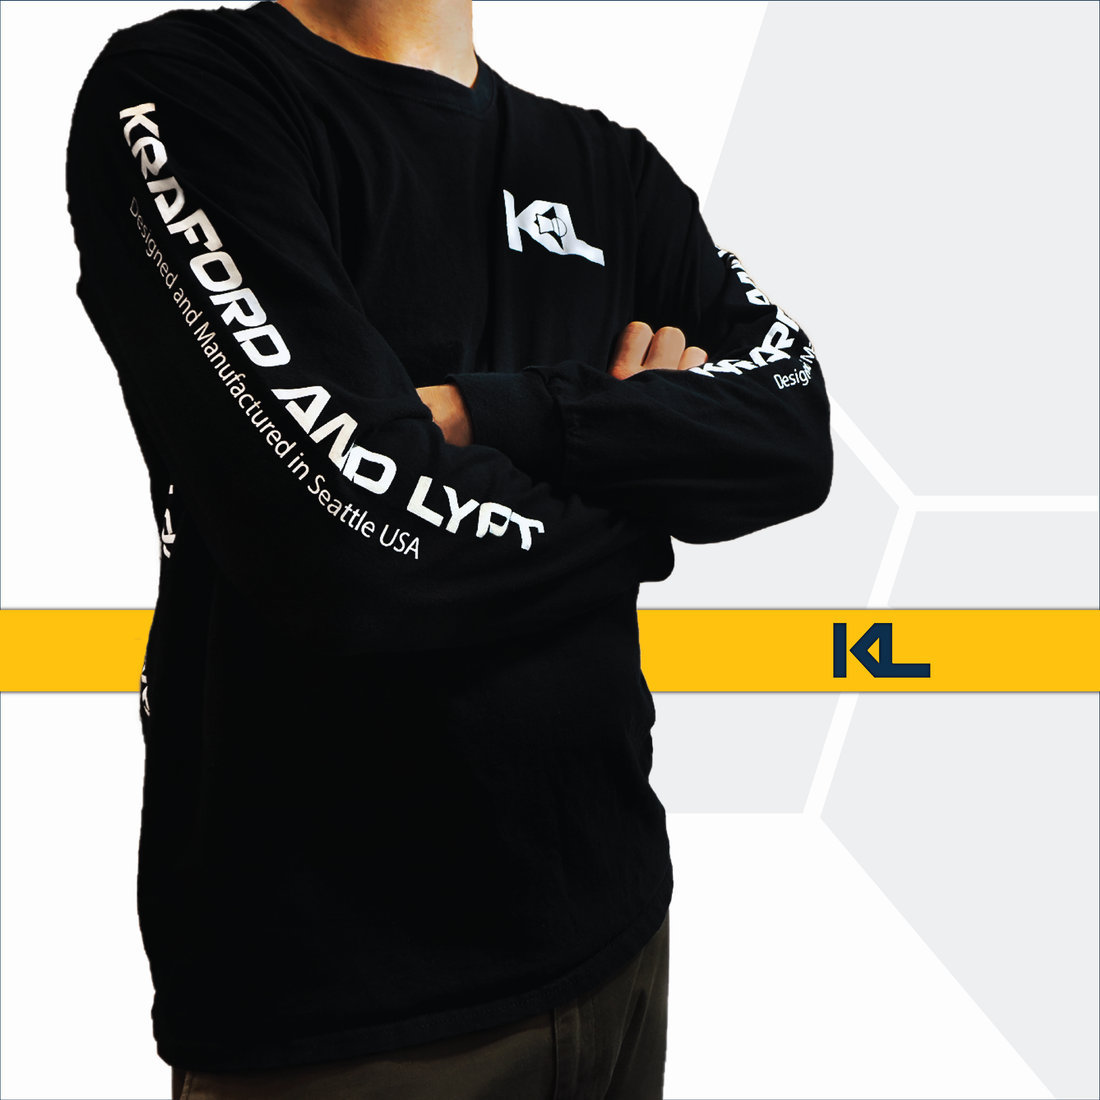 New Long Sleeve Shirts by Kraford and Lypt